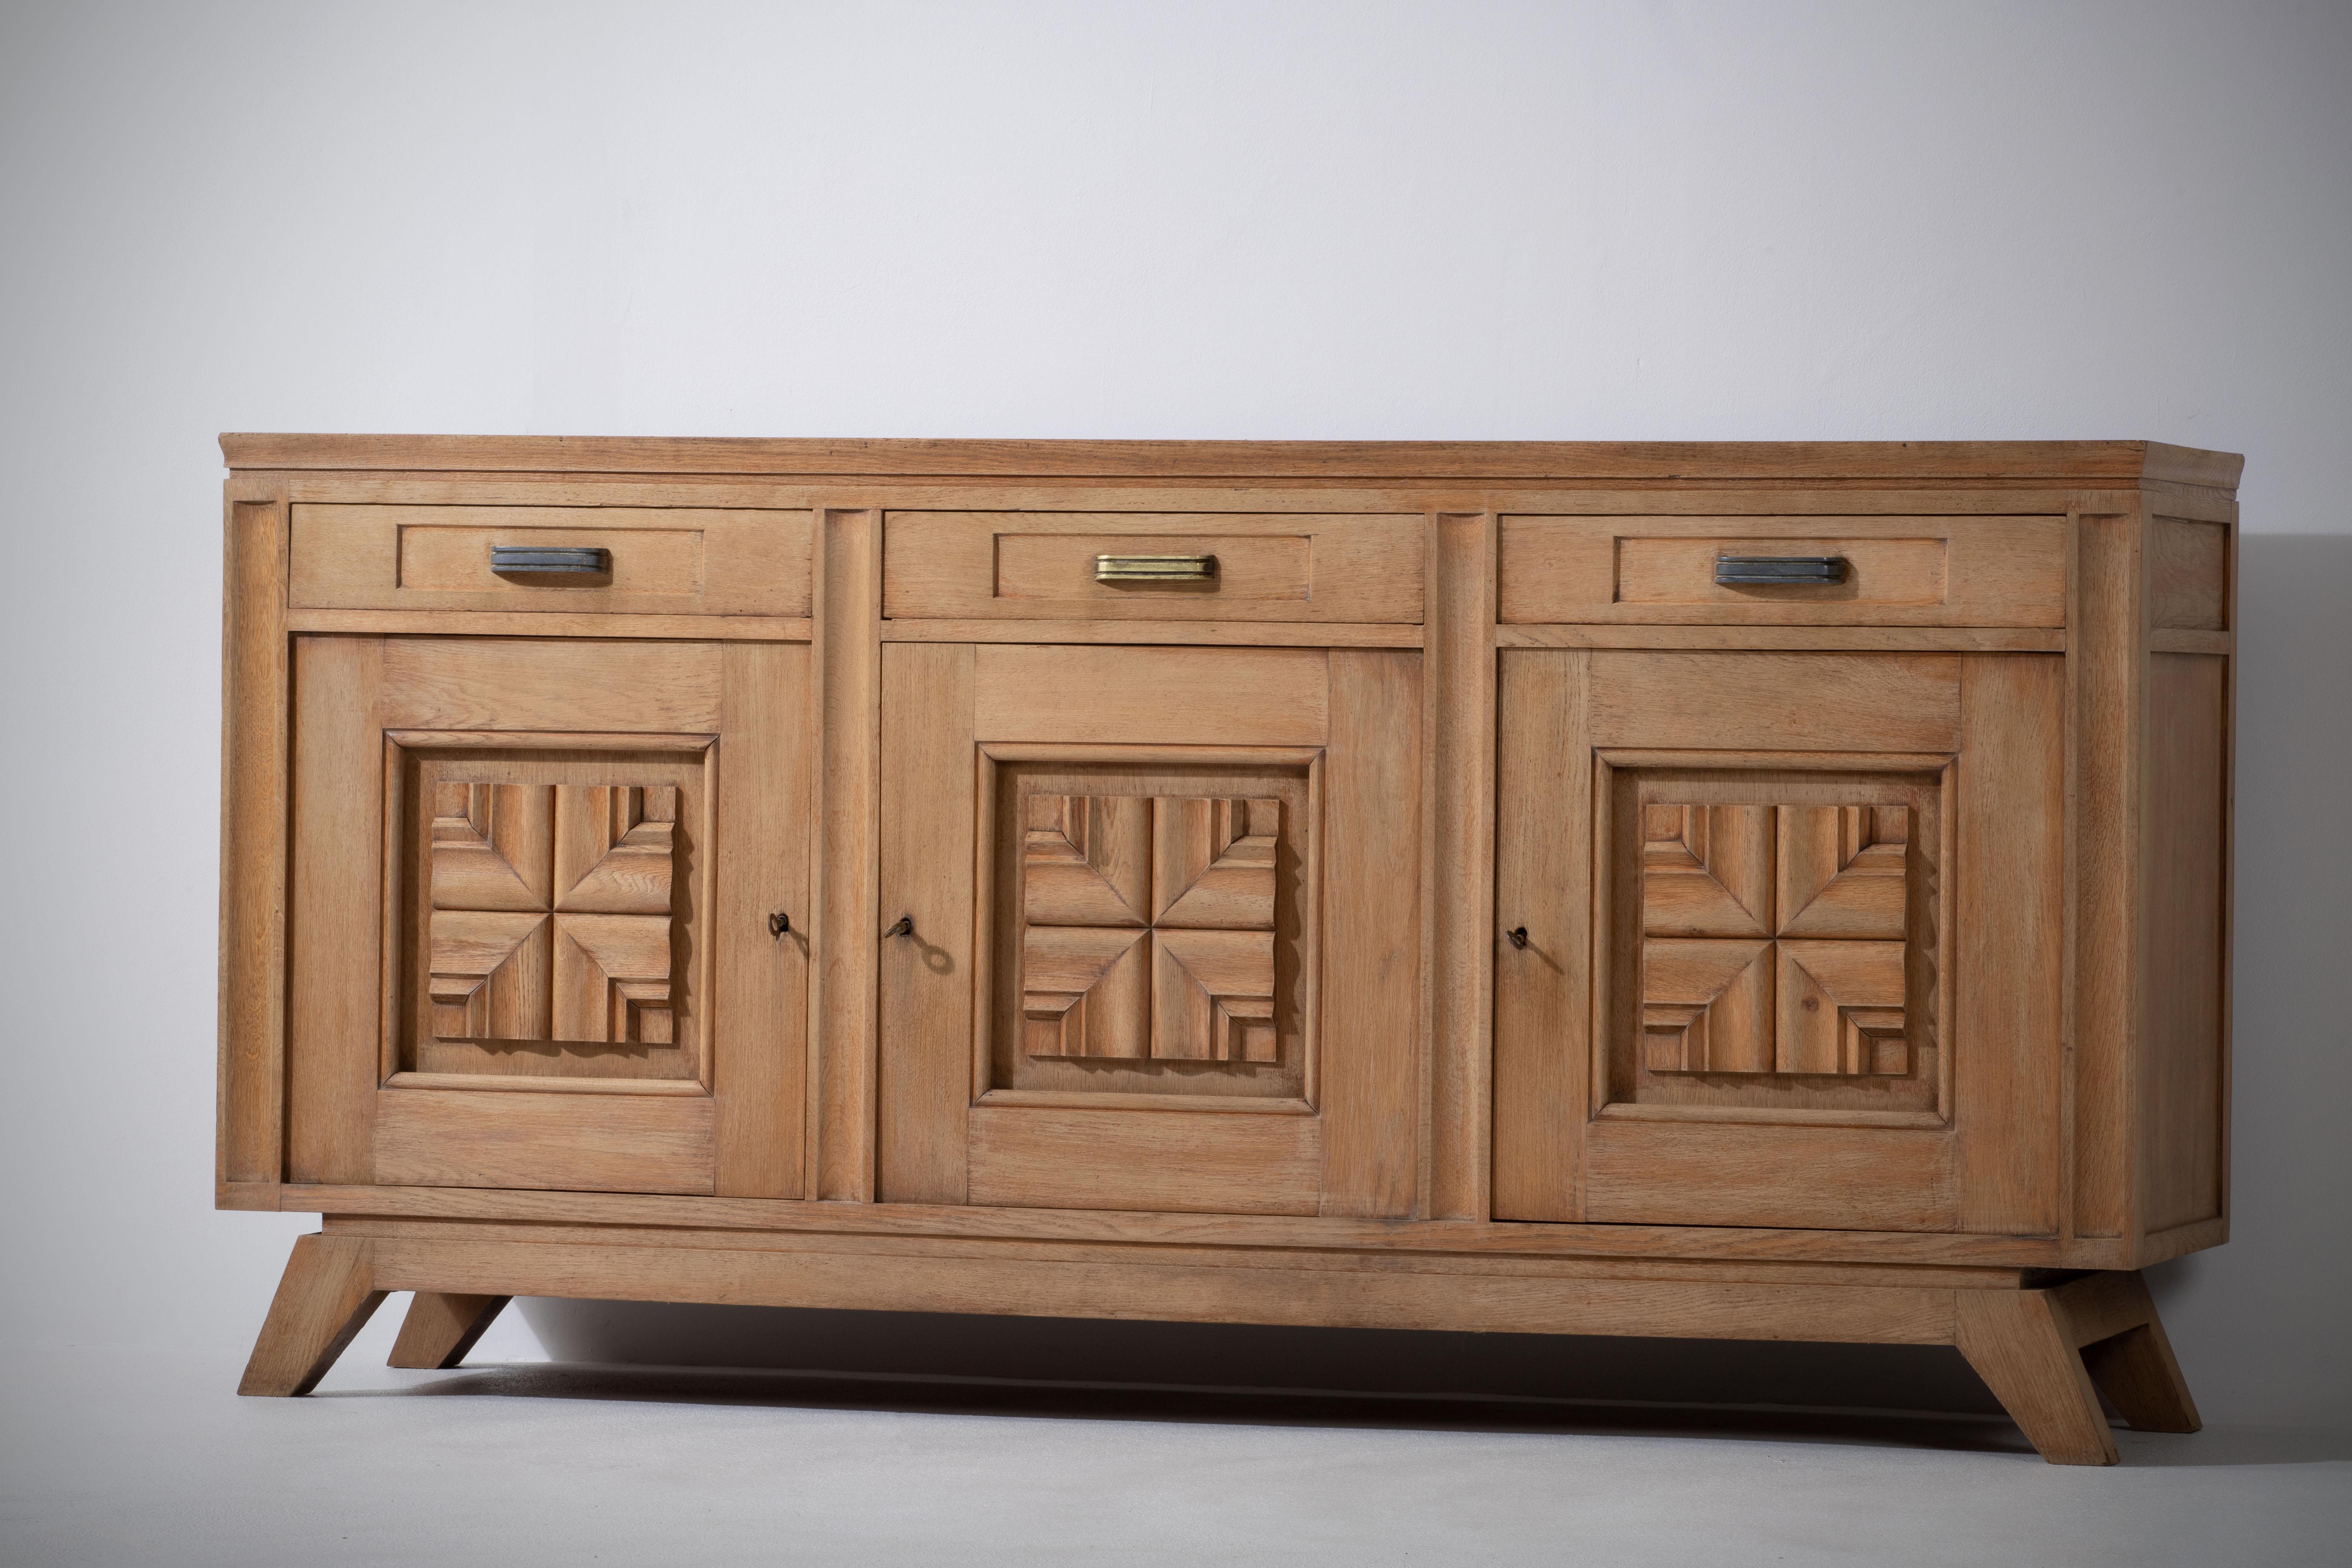 Bleached Solid Oak Cabinet with Graphic Details, France, 1940s For Sale 3